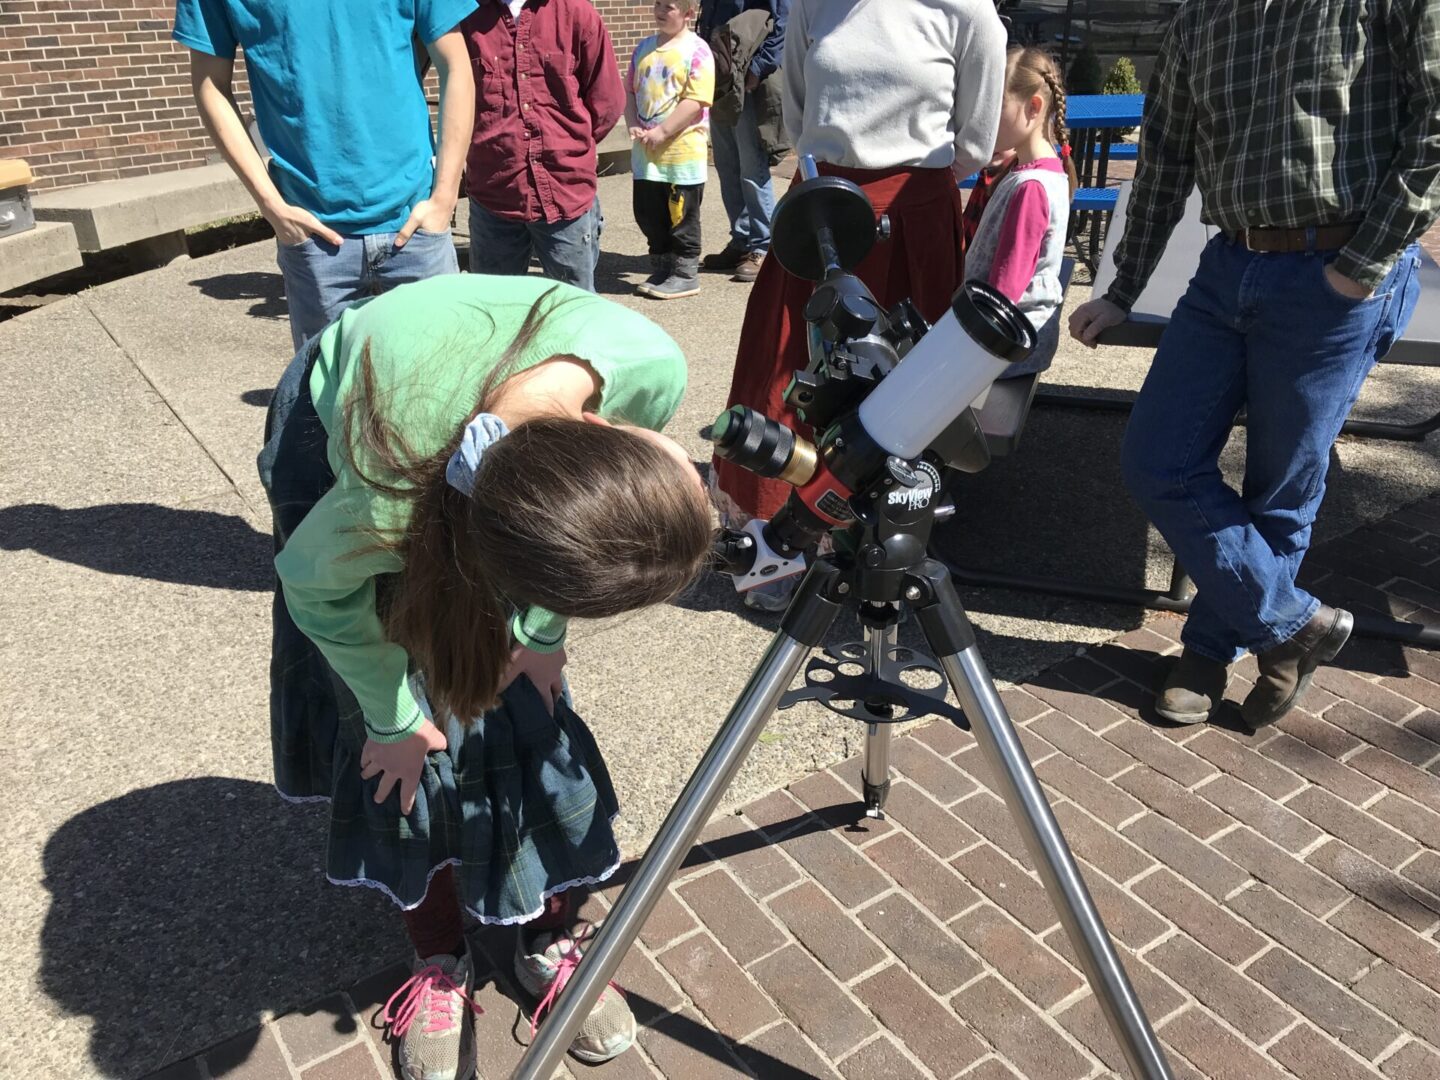 A group of people looking at a telescope.